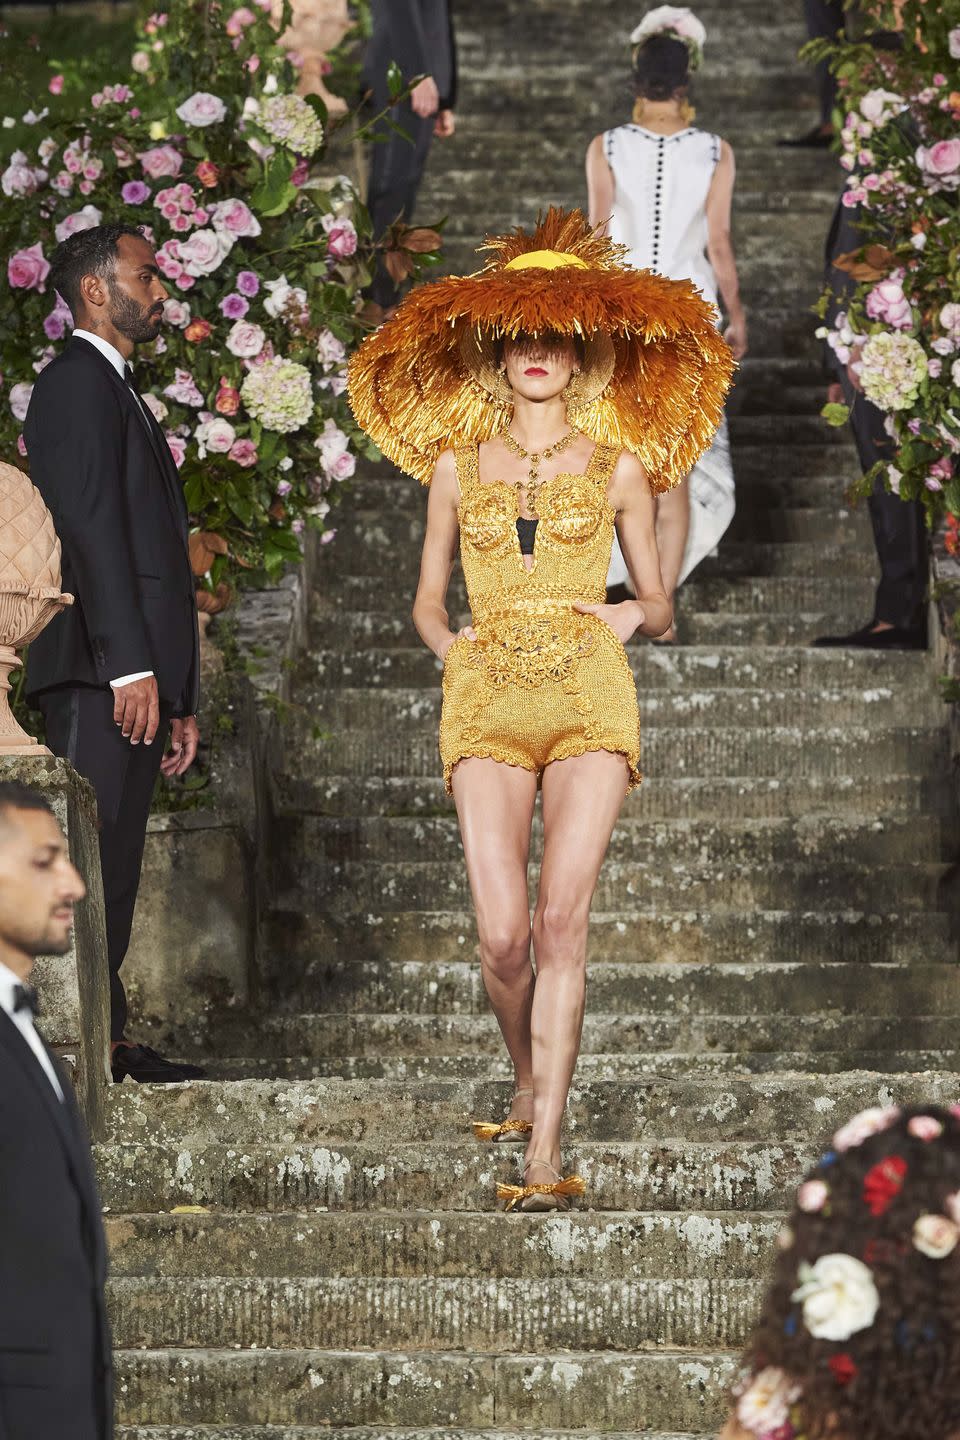 See highlights from Dolce & Gabbana's spectacular Alta Moda show